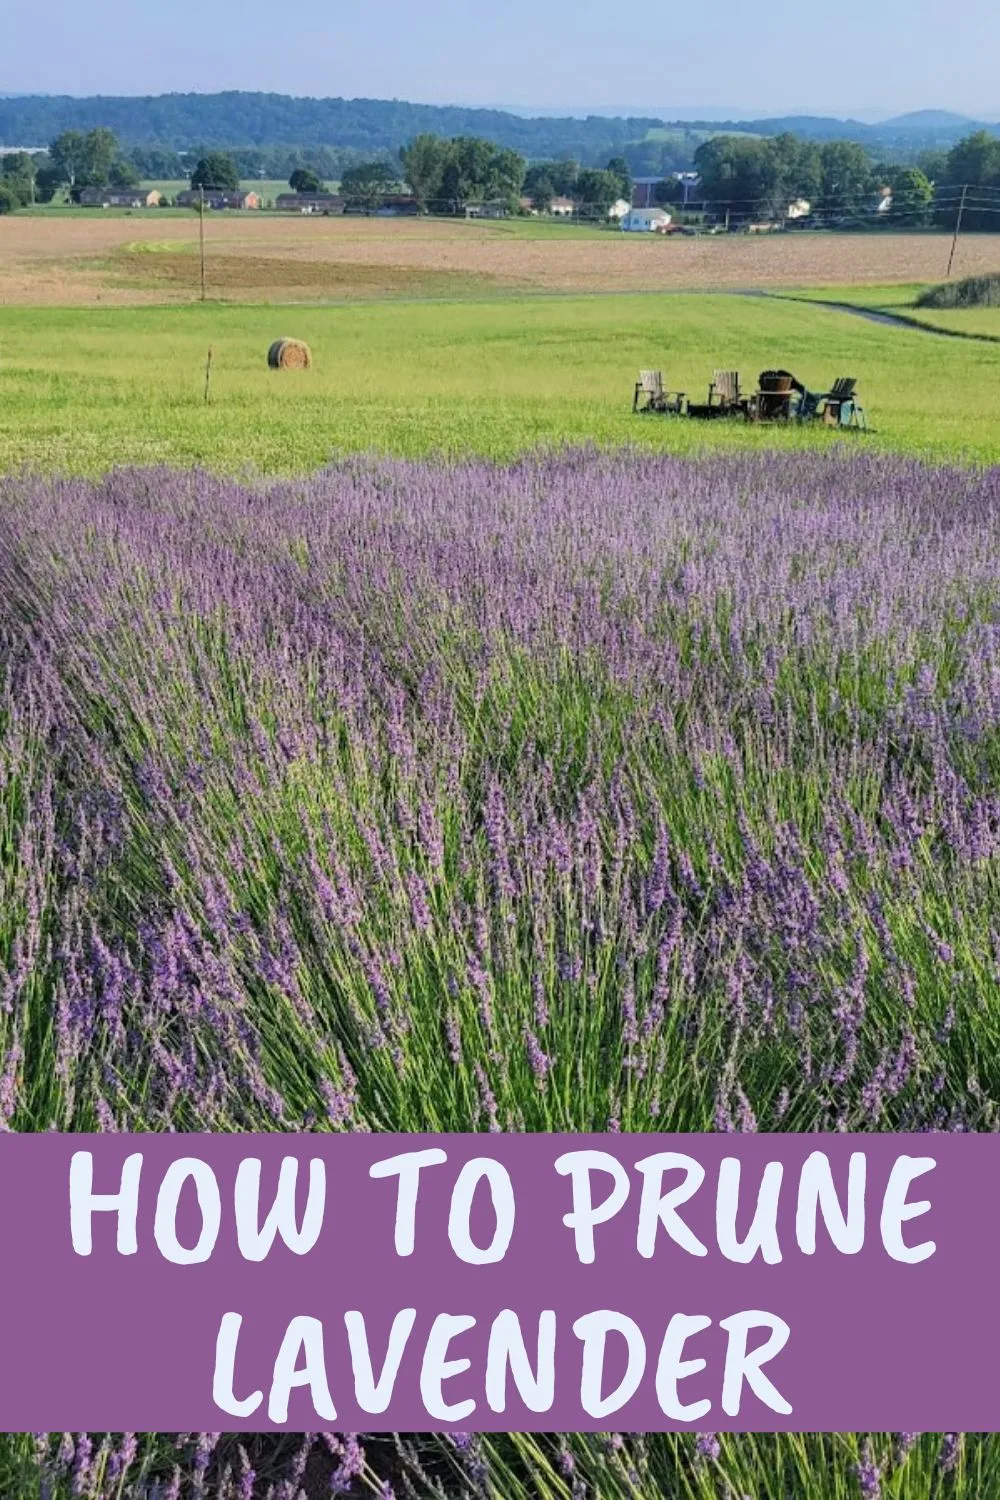 How to prune lavender.